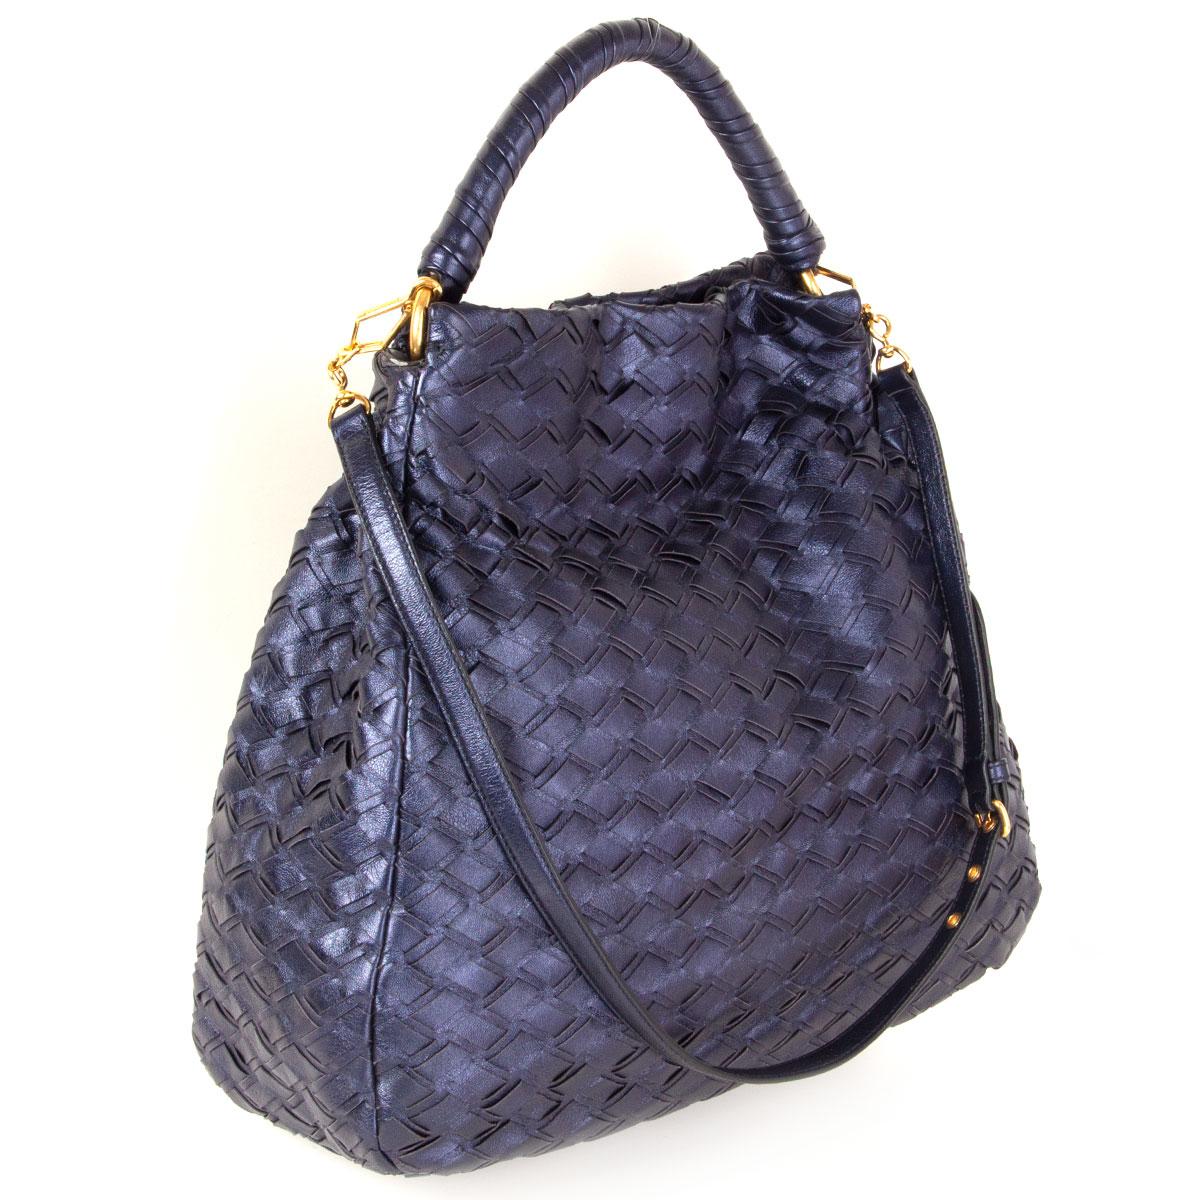 100% authentic Miu Miu woven hobo bag in metallic navy blue lambskin featuring gold-tone hardware. Comes with a detachable and adjustable shoulder-strap. Opens with two push-buttons on top and is lined in deep purple satin with one zipper pocket